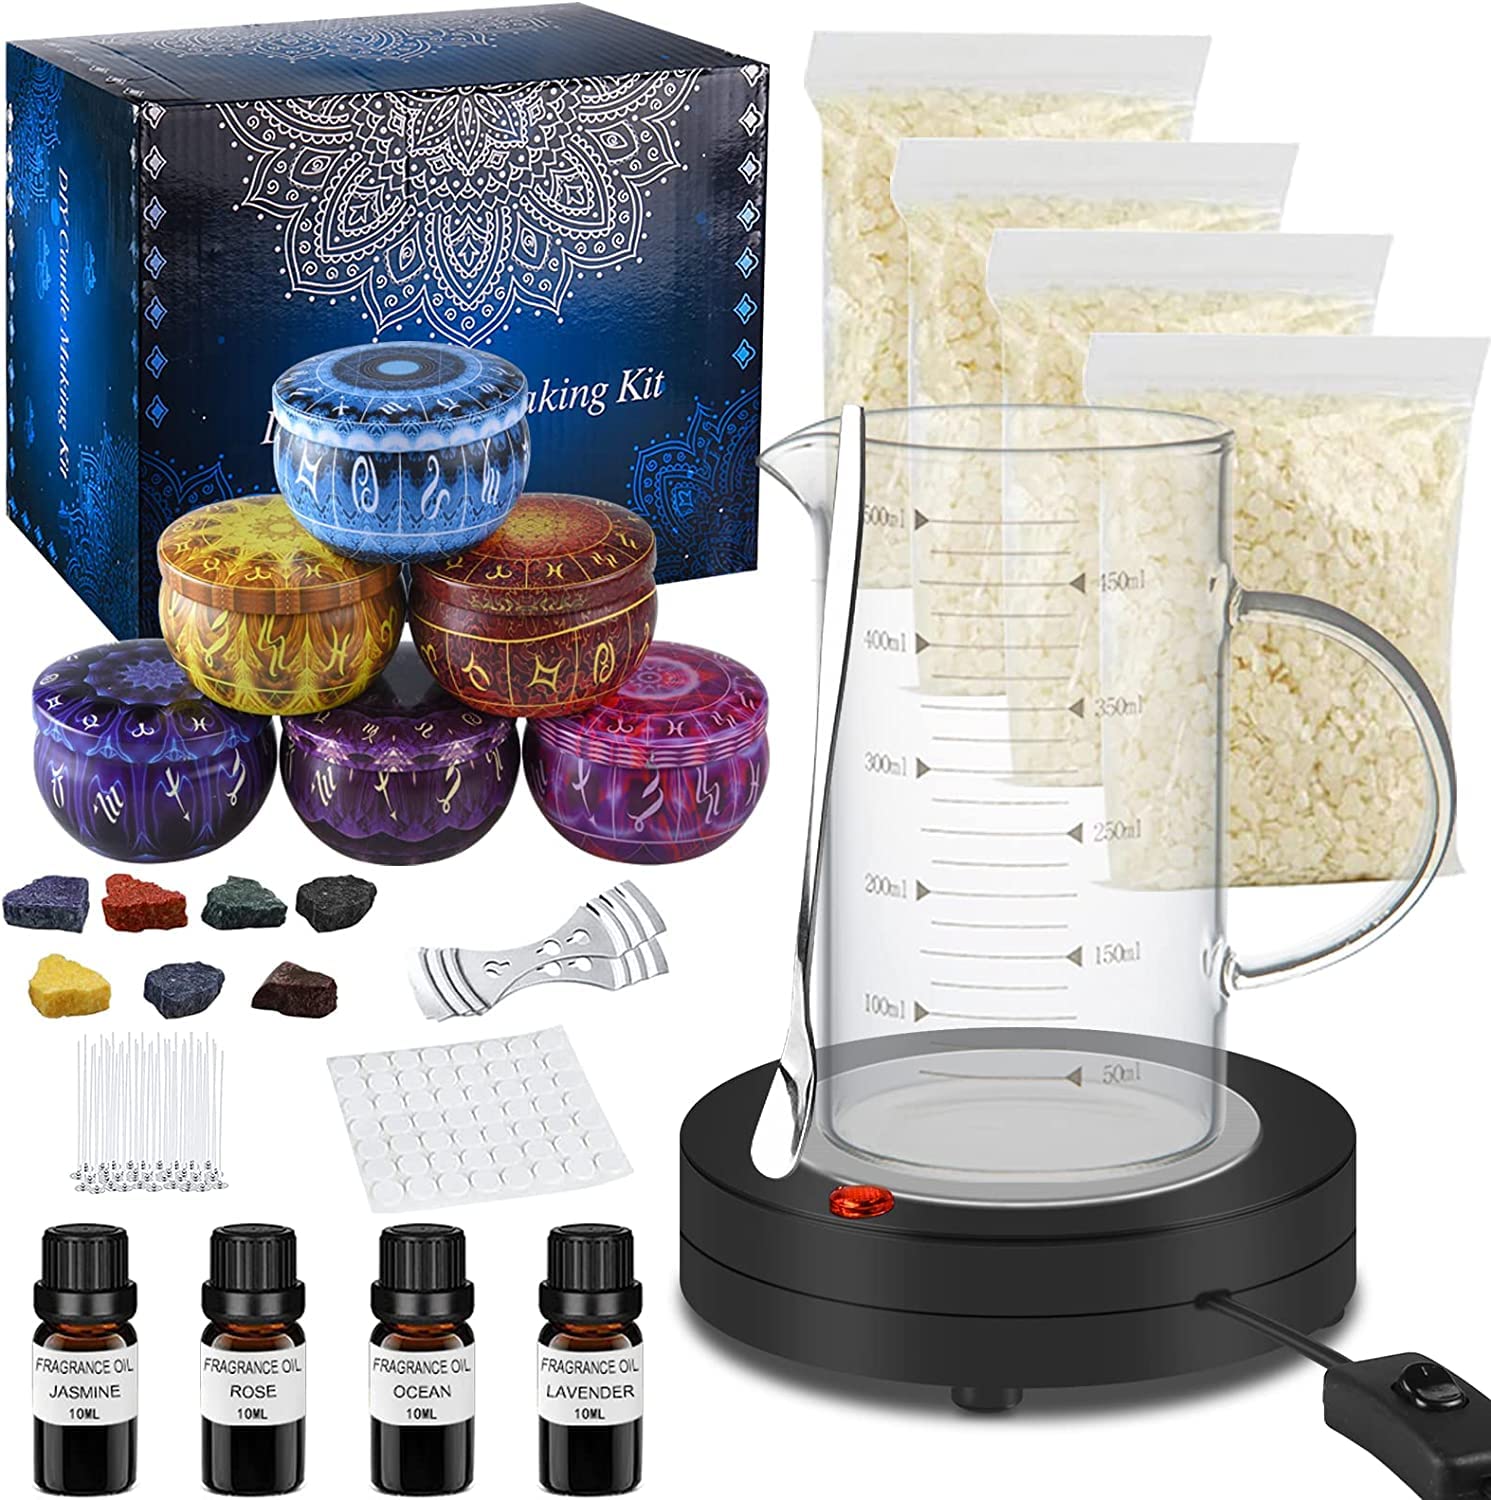 Complete DIY Candle Making Kit Supplies Full Beginners Soy Candle Making Kit  Including Soybean Wax, Dyes, Wicks, Pot, Tins & More 